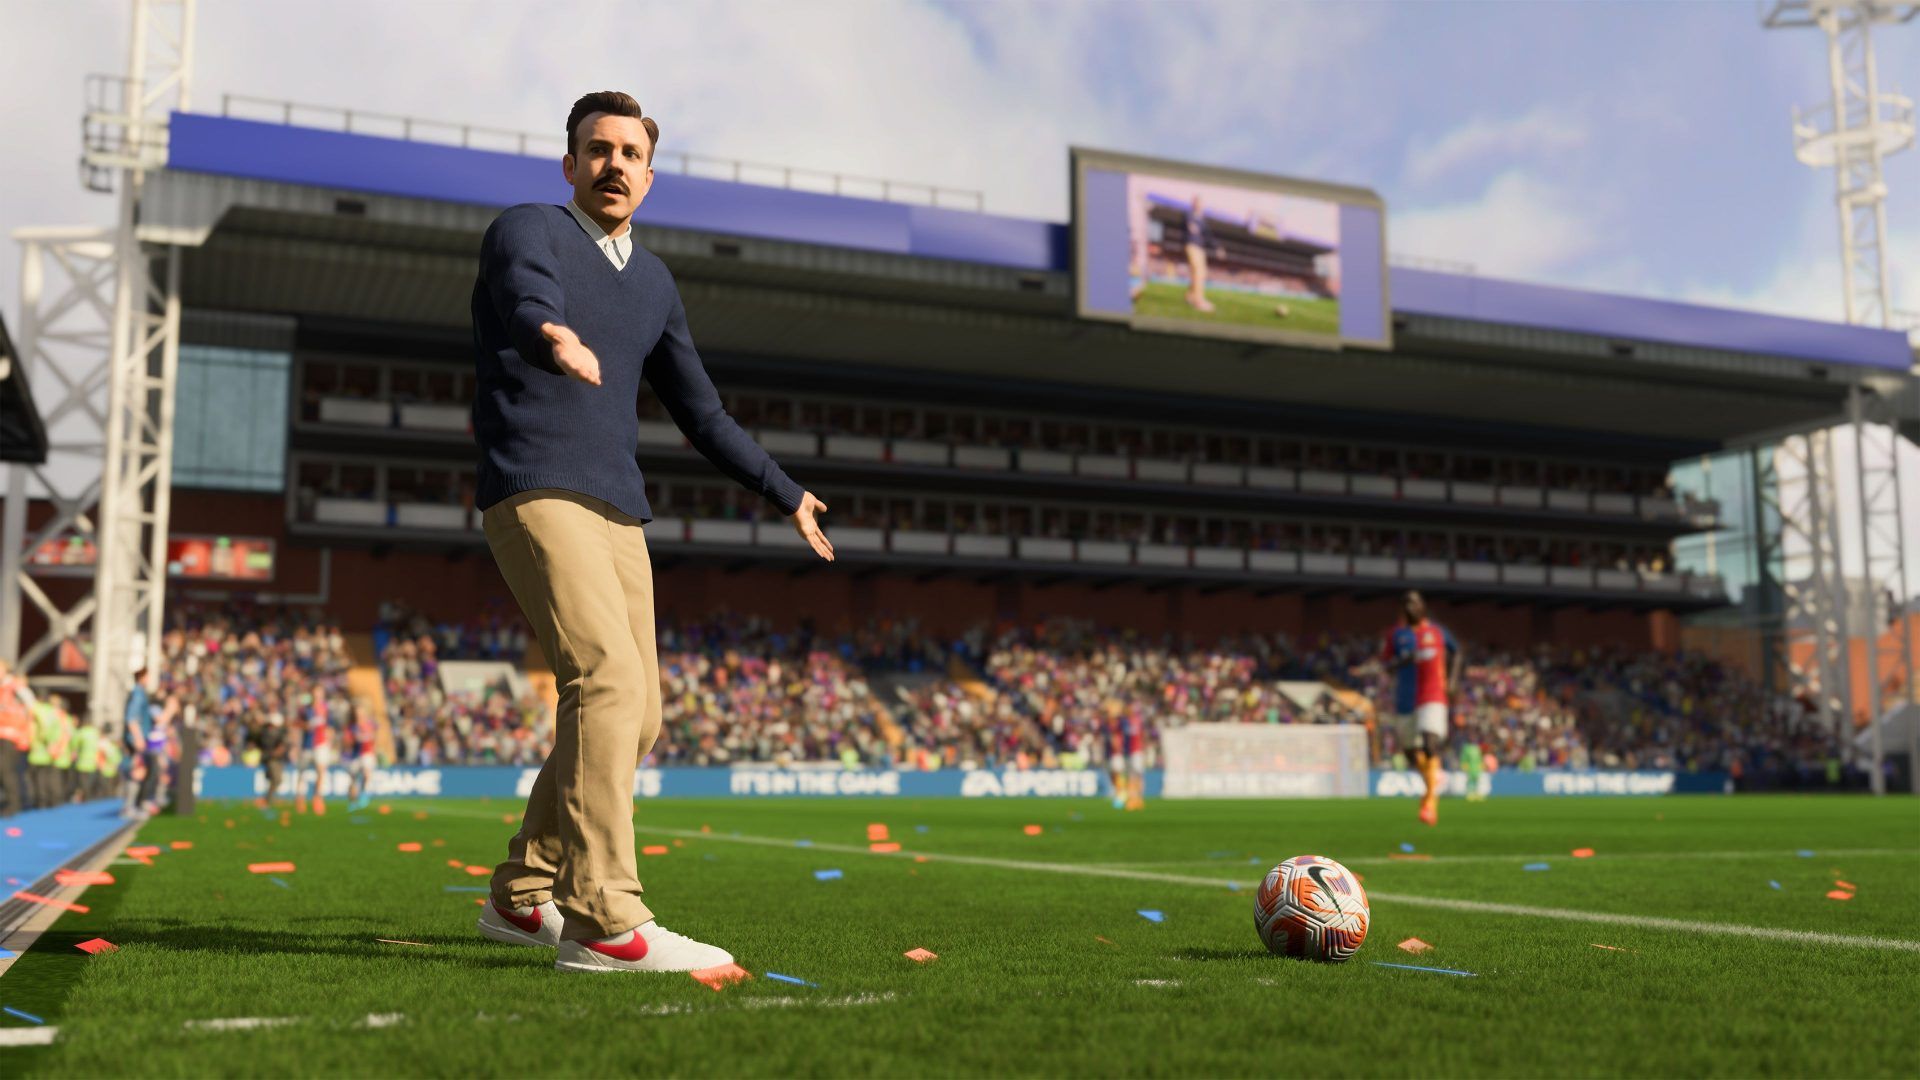 ted lazo in fifa 23